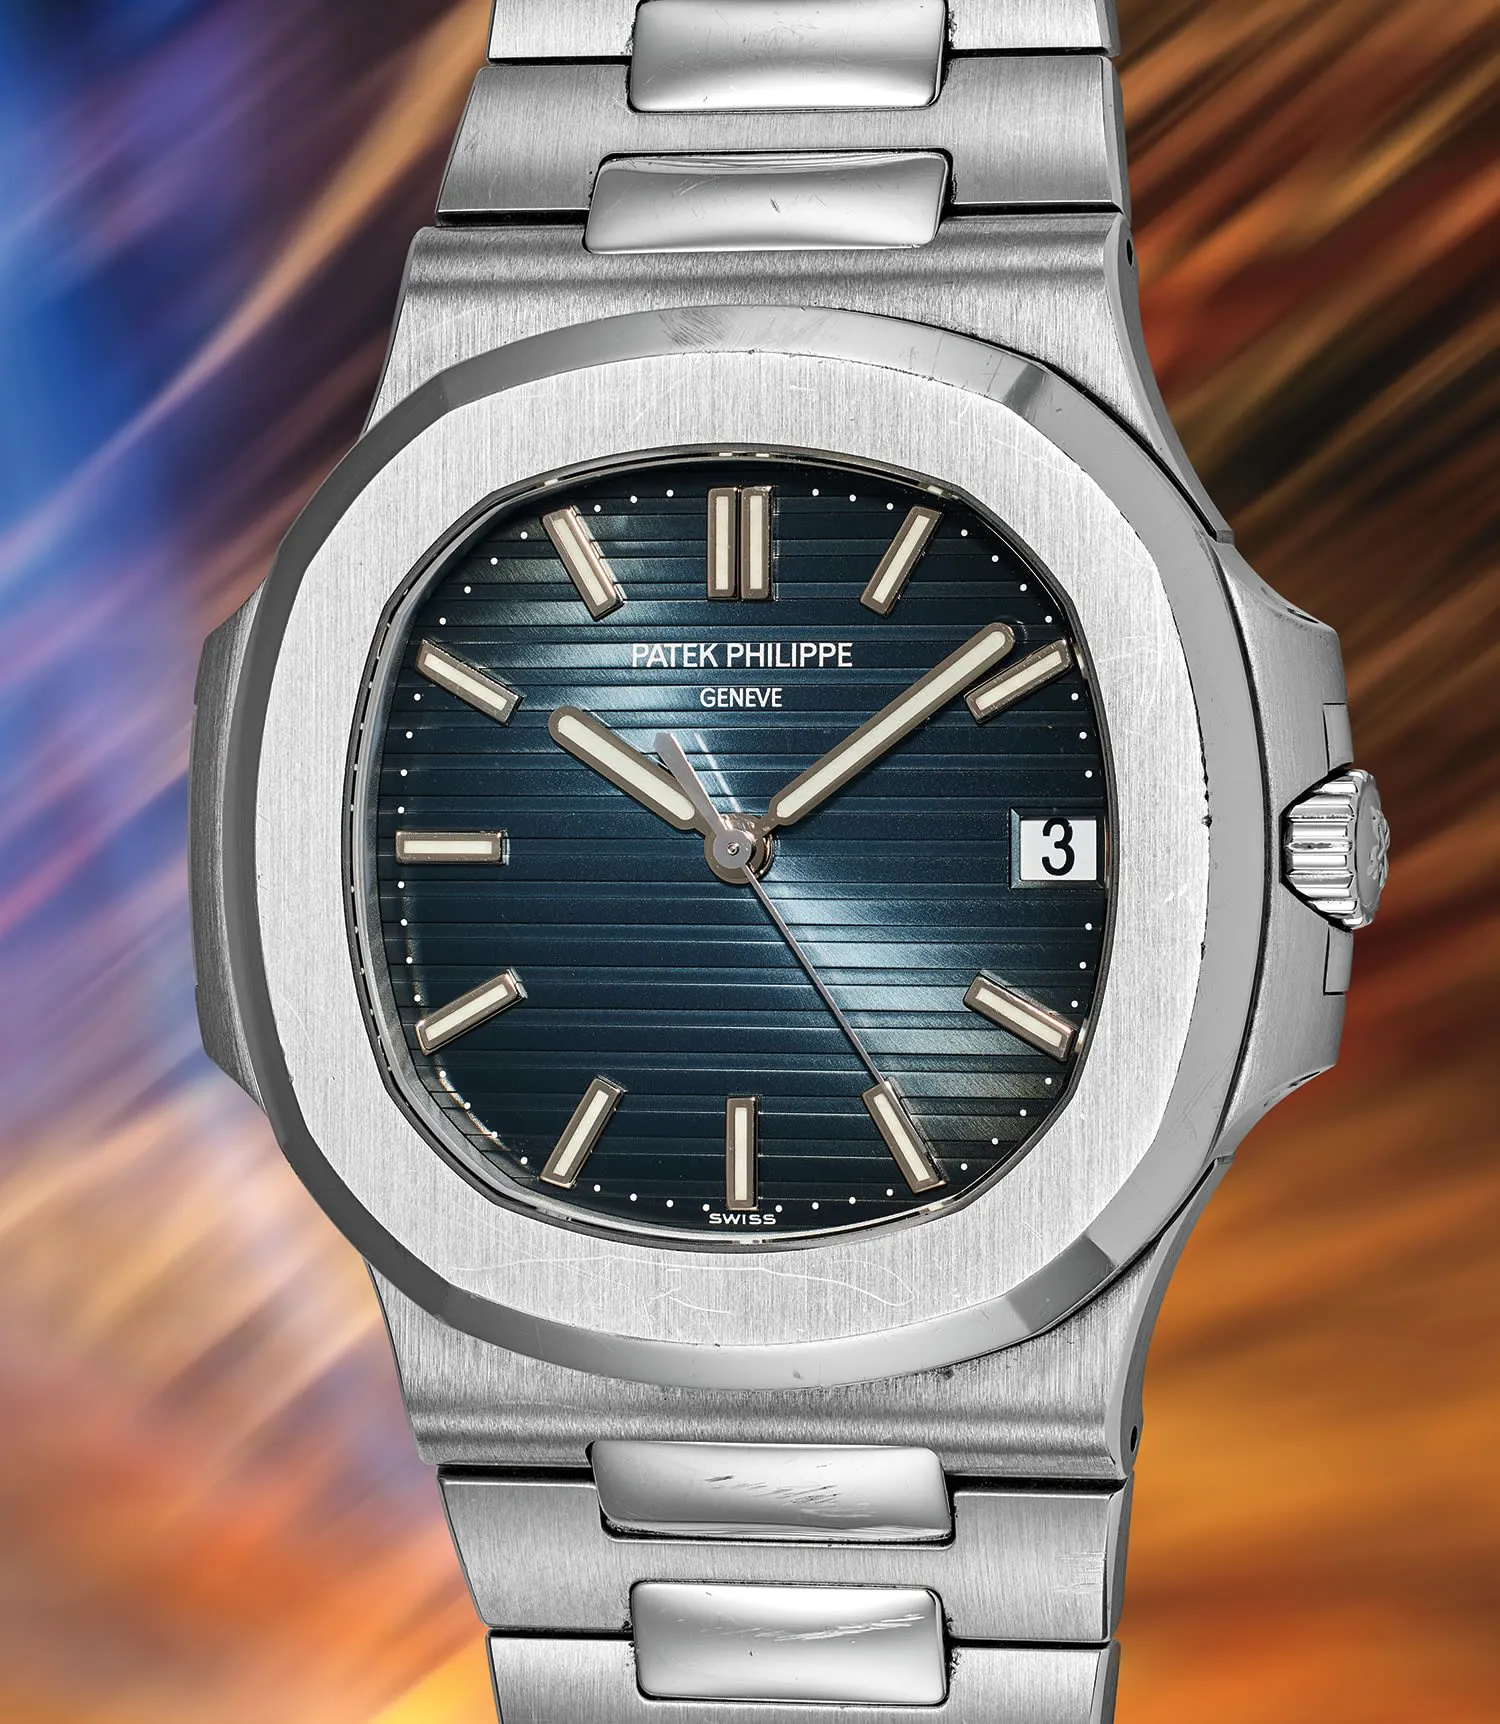 Patek Philippe Nautilus 5711/1A-010 42.5mm Stainless steel